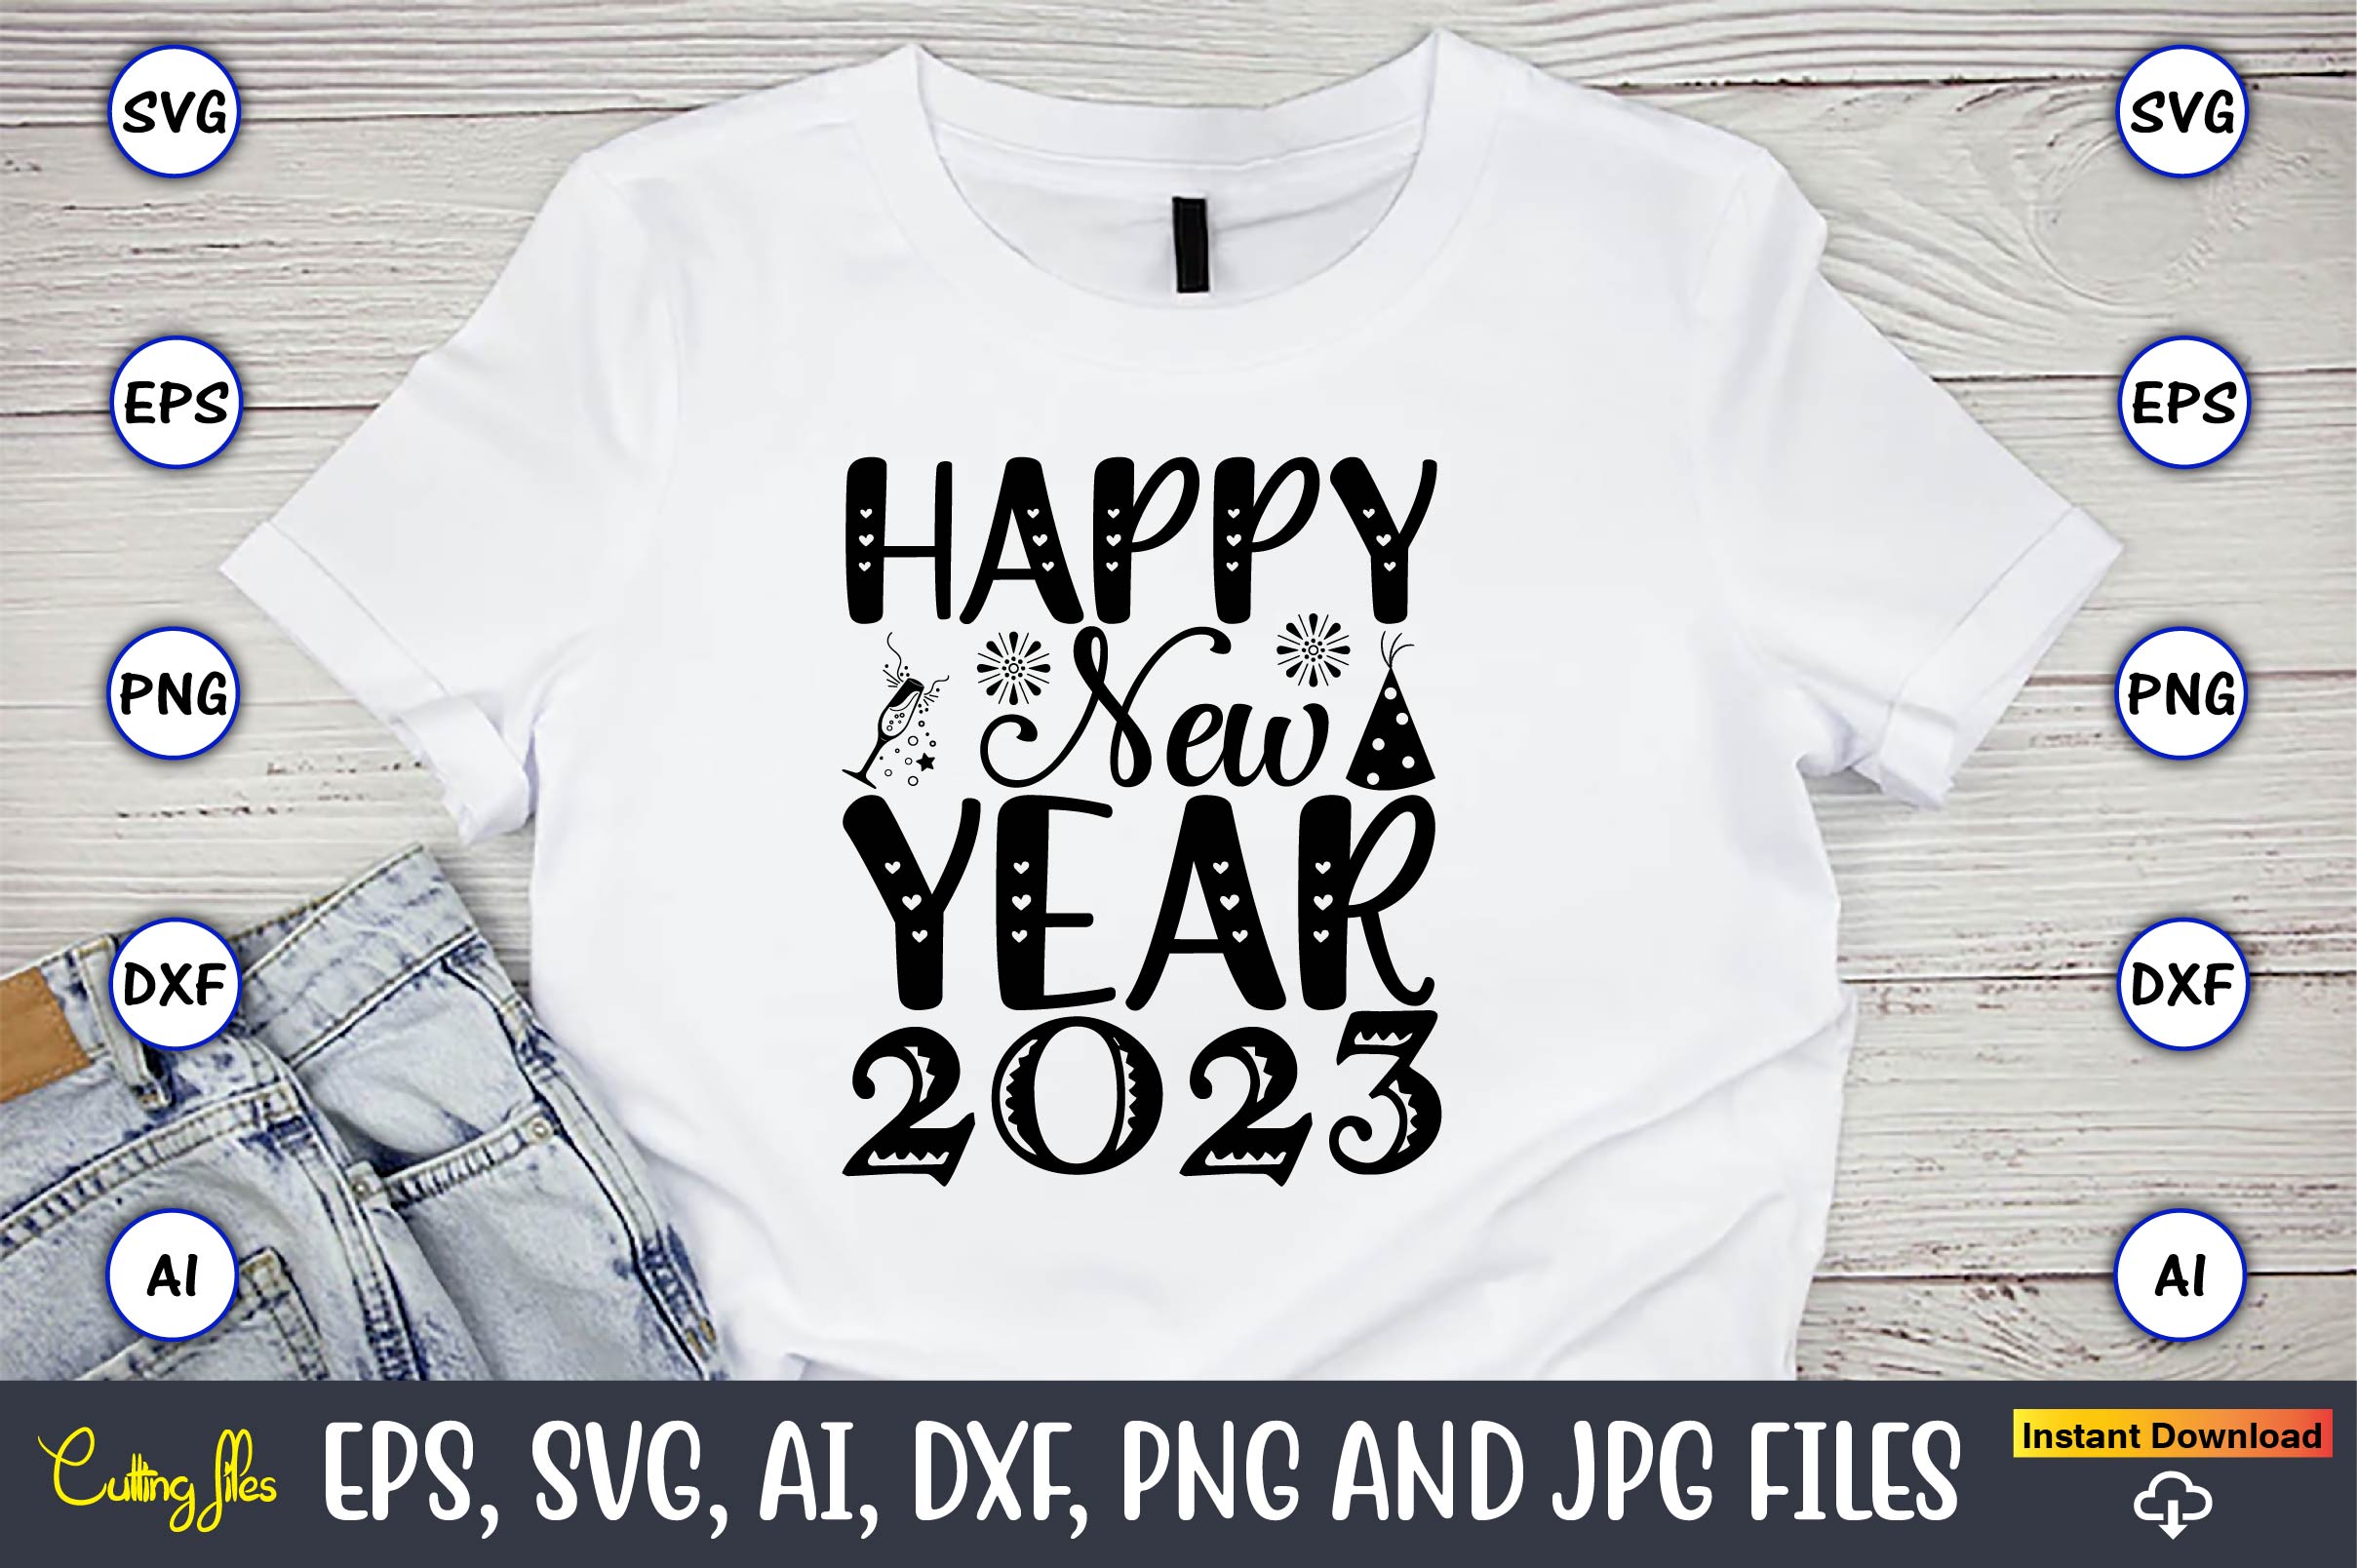 Image of a white t-shirt with a great inscription Happy new year 2023.